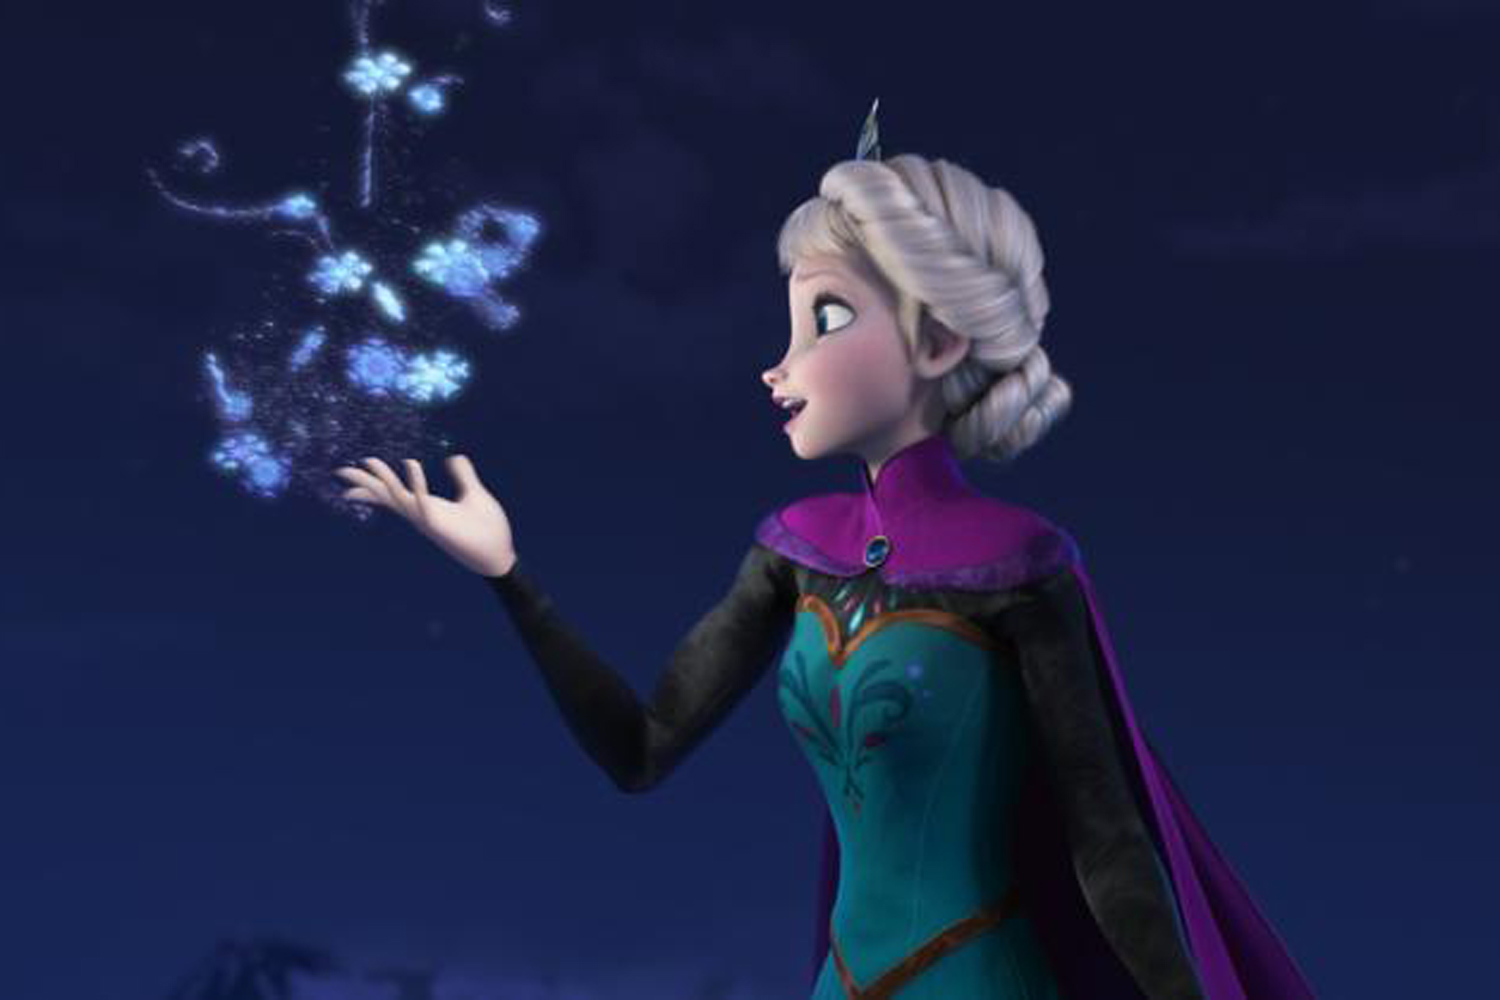 Elsa From Frozen Is the Most Popular Disney Princess | Time